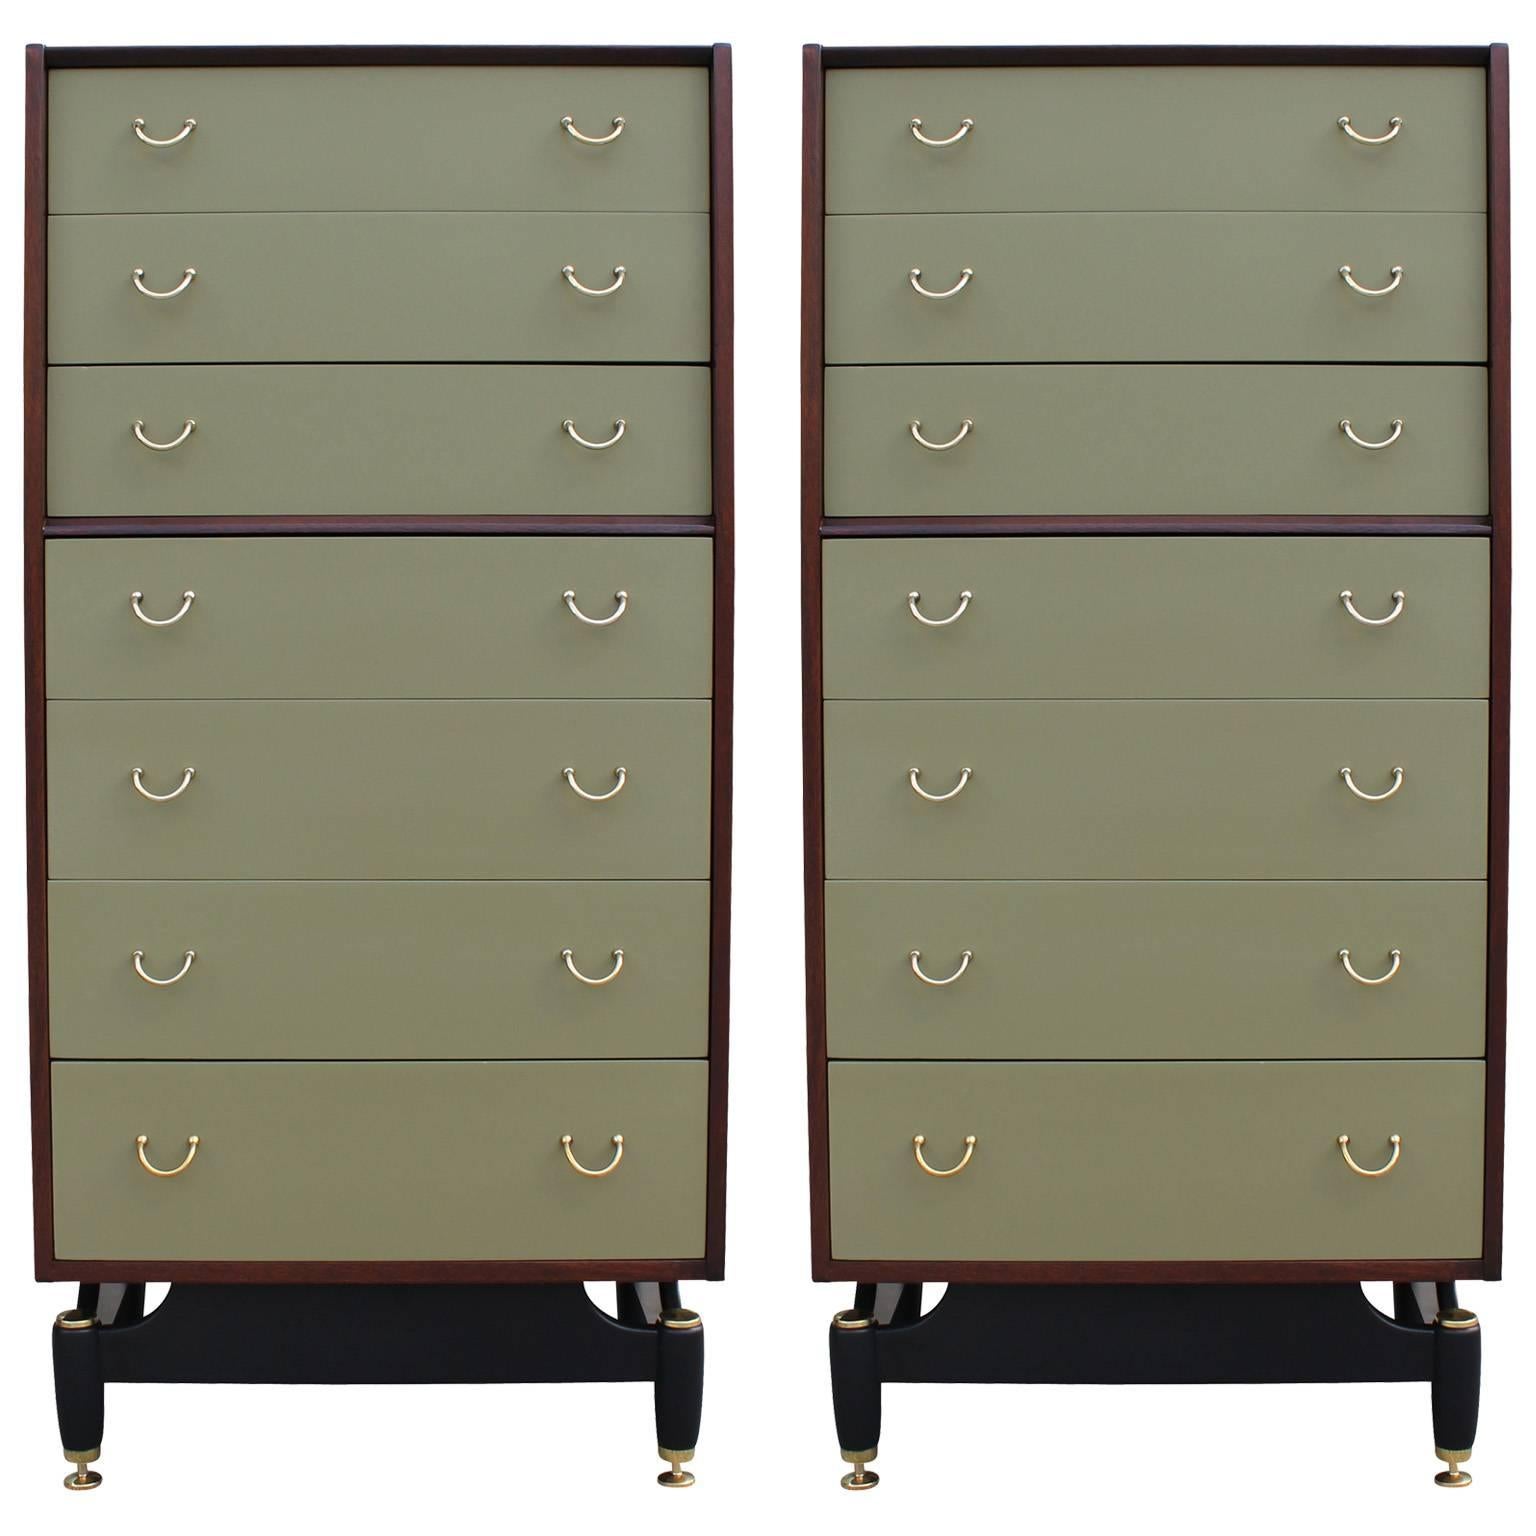 Wonderful pair of matching tall dressers or lingerie chests with shiny brass hardware. Case is finished in a medium dark walnut while drawer fronts are finished in a moss green lacquer. Black lacquered base provides nice negative space. Dressers